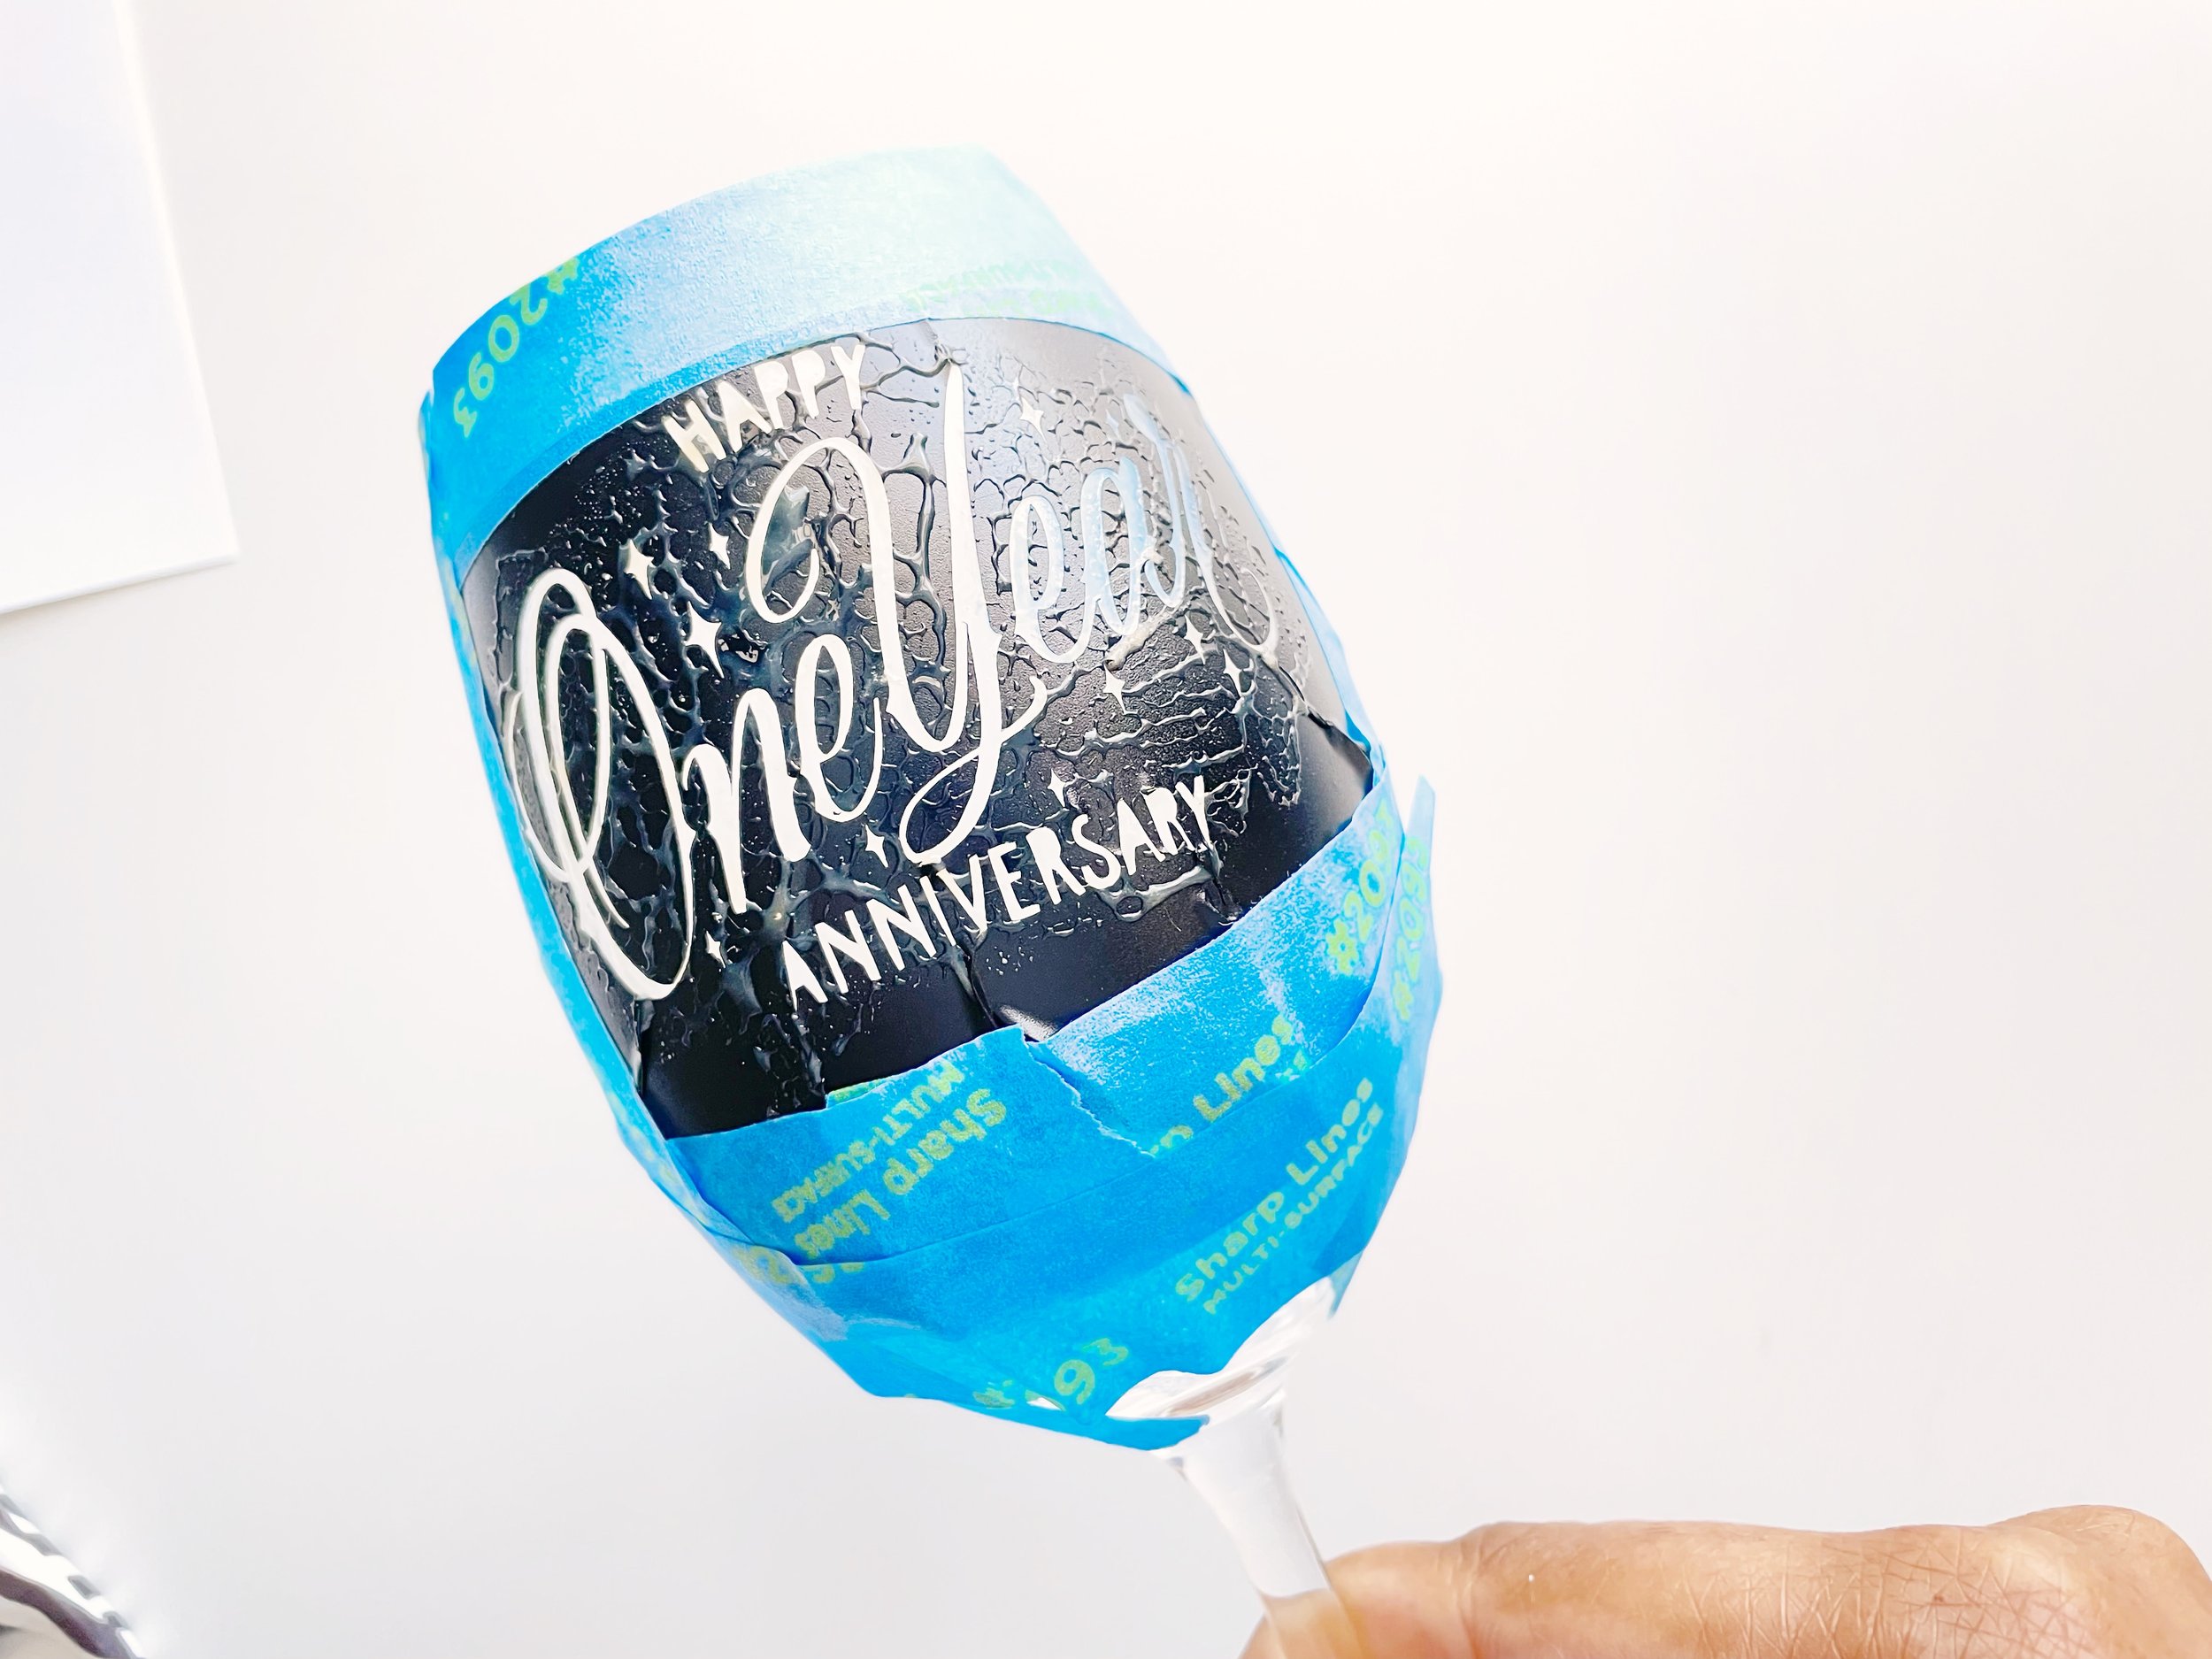 DIY Glass Etching Your Hand-Lettering With the Cricut Joy — Stacey  Scribbling